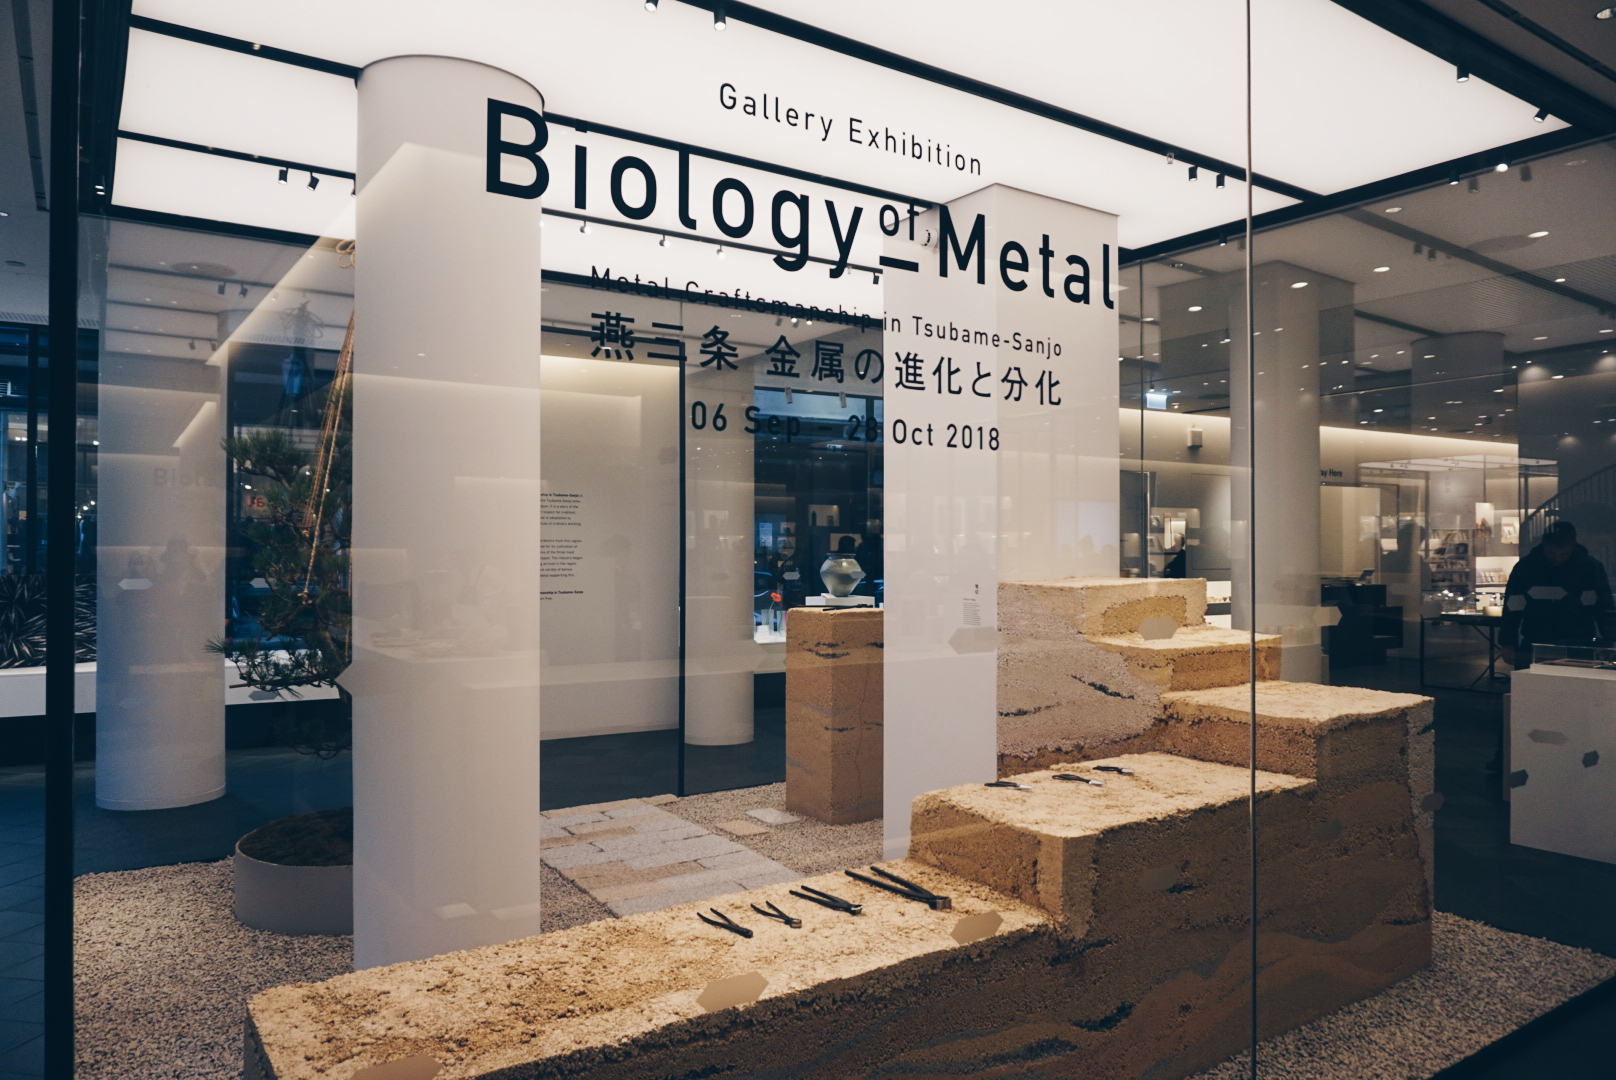 The best things to do in Kensington, London - Japan House London Biology of Metal Exhibition | The LDN Gal